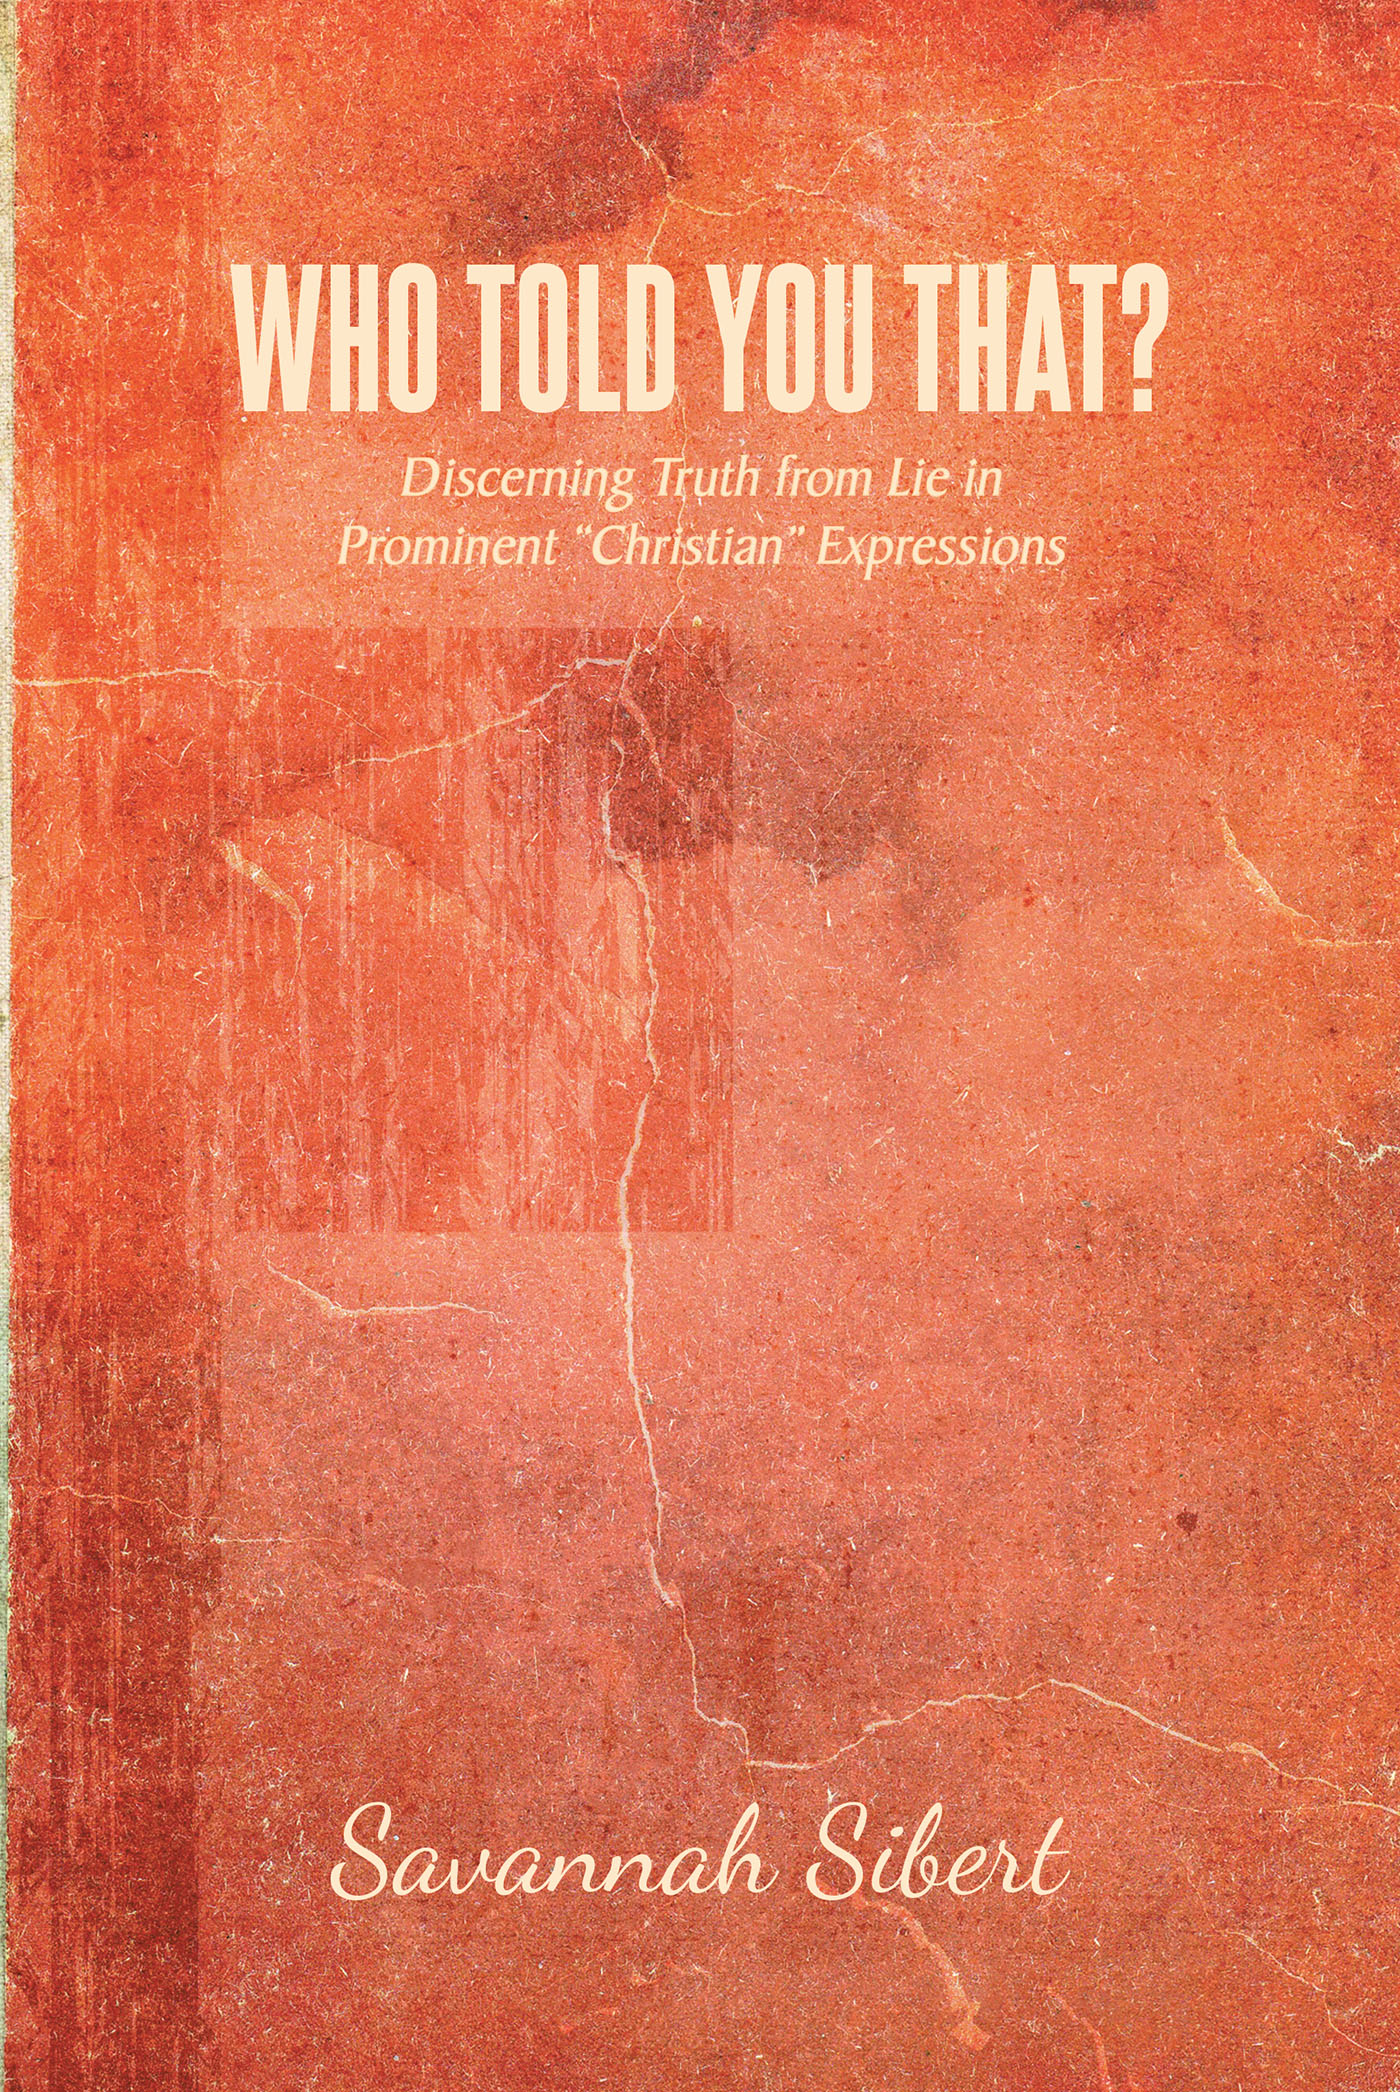 Author Savannah Sibert’s New Book, "Who Told You That?" is a Powerful Faith-Based Read That Reveals False Ideals Often Promoted Within Modern Christianity